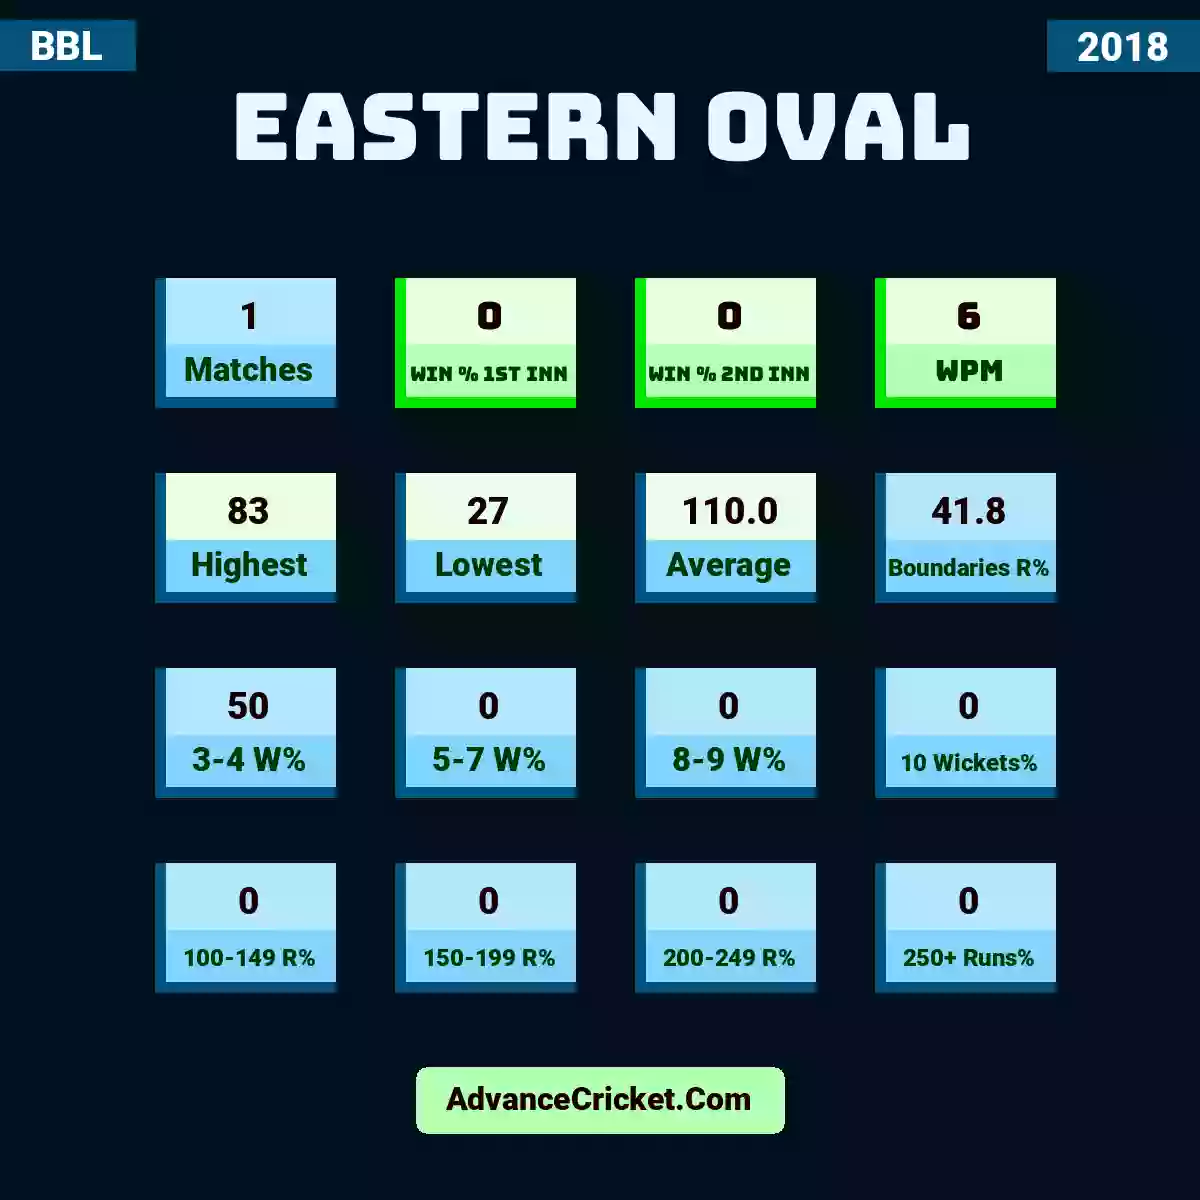 Image showing Eastern Oval with Matches: 1, Win % 1st Inn: 0, Win % 2nd Inn: 0, WPM: 6, Highest: 83, Lowest: 27, Average: 110.0, Boundaries R%: 41.8, 3-4 W%: 50, 5-7 W%: 0, 8-9 W%: 0, 10 Wickets%: 0, 100-149 R%: 0, 150-199 R%: 0, 200-249 R%: 0, 250+ Runs%: 0.